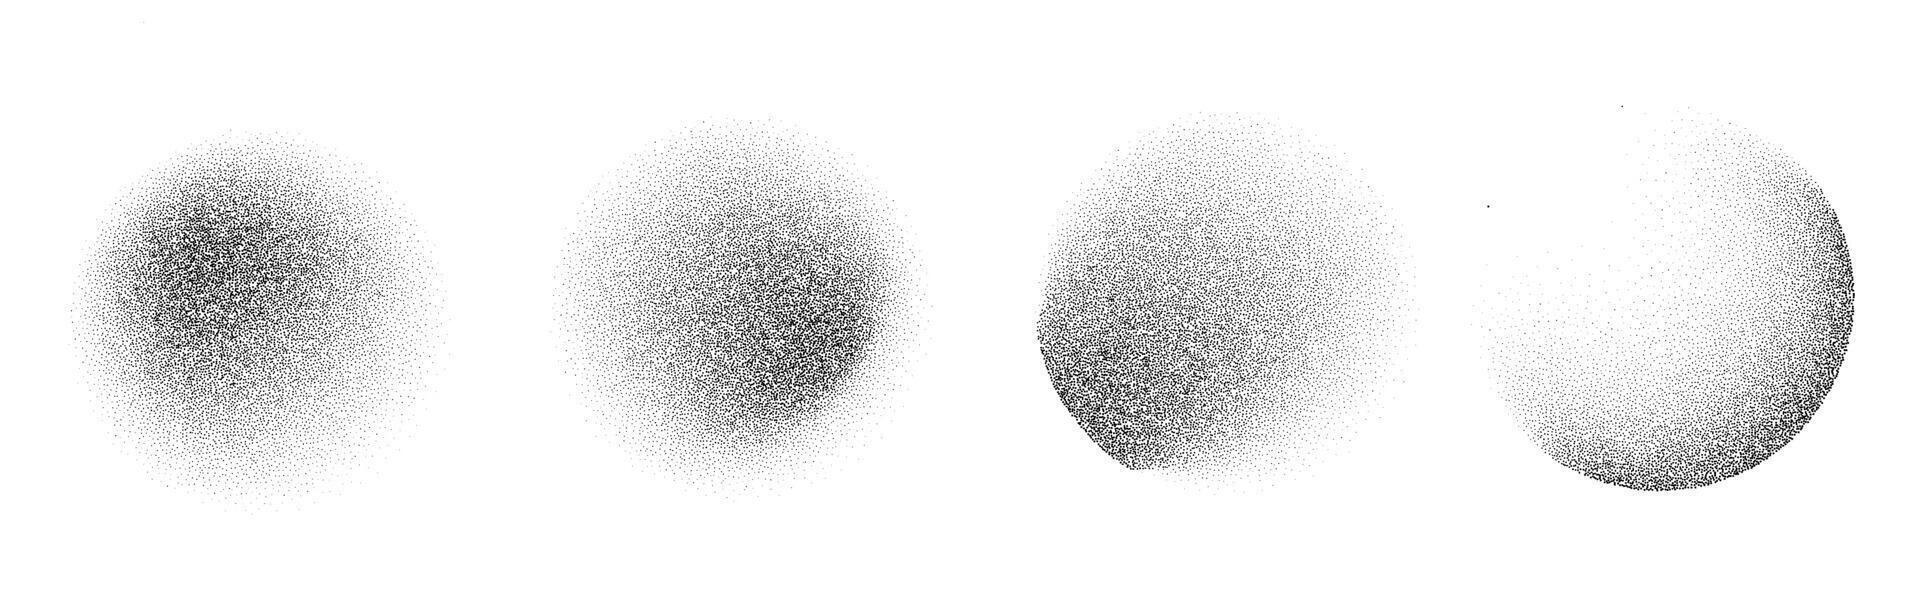 Spray gradient noise texture. Dotted rounds with grunge textured effect. Grainy blurred vector drips.